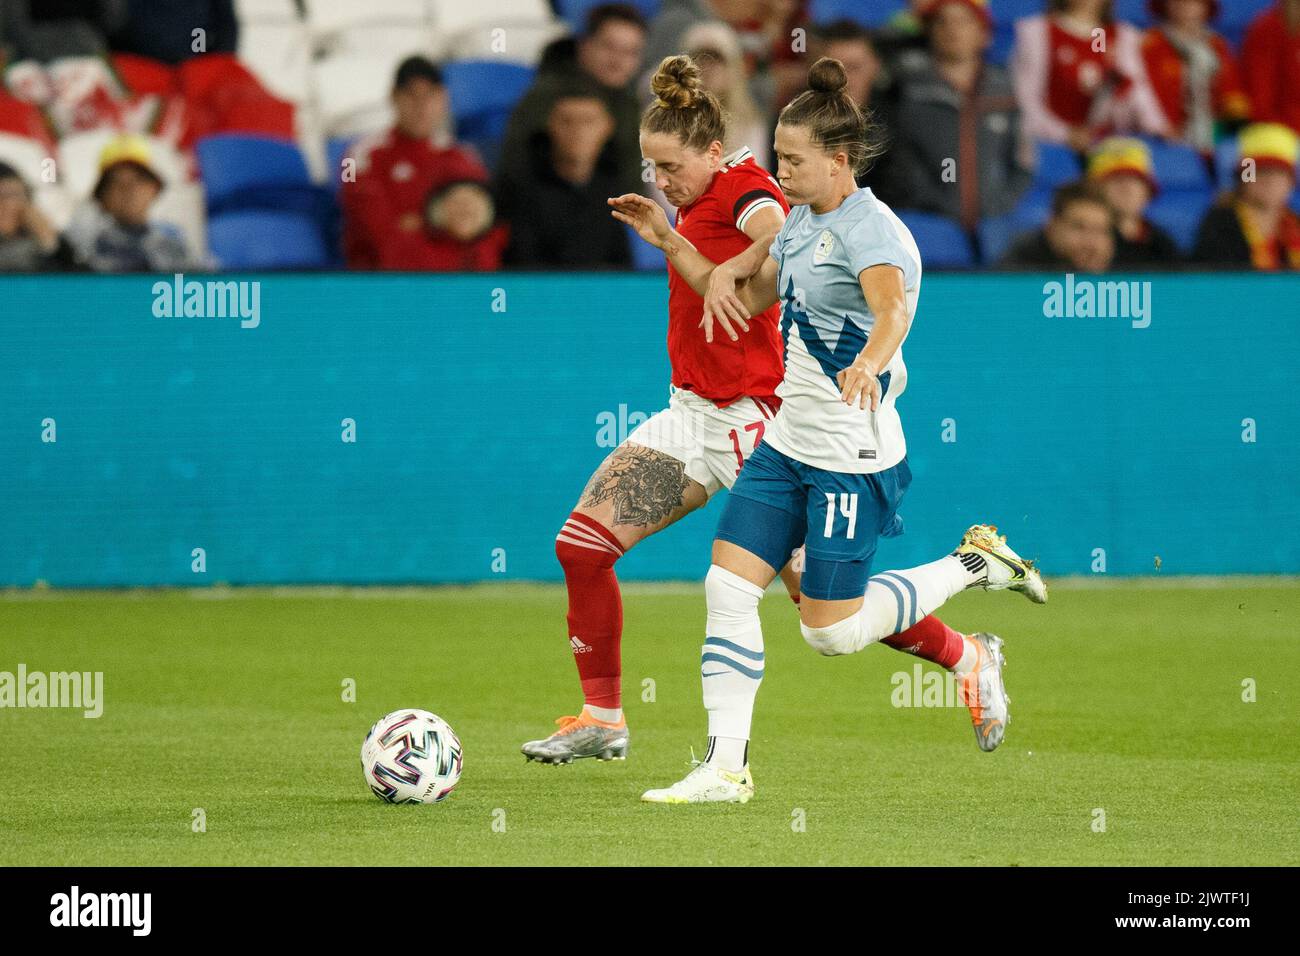 Cardiff, UK. 6th Sep, 2022. Georgia Walters of Wales and Špela Kolbl of Slovenia compete during the Wales v Slovenia Women's World Cup Qualification match. Credit: Gruffydd Thomas/Alamy Live News Stock Photo